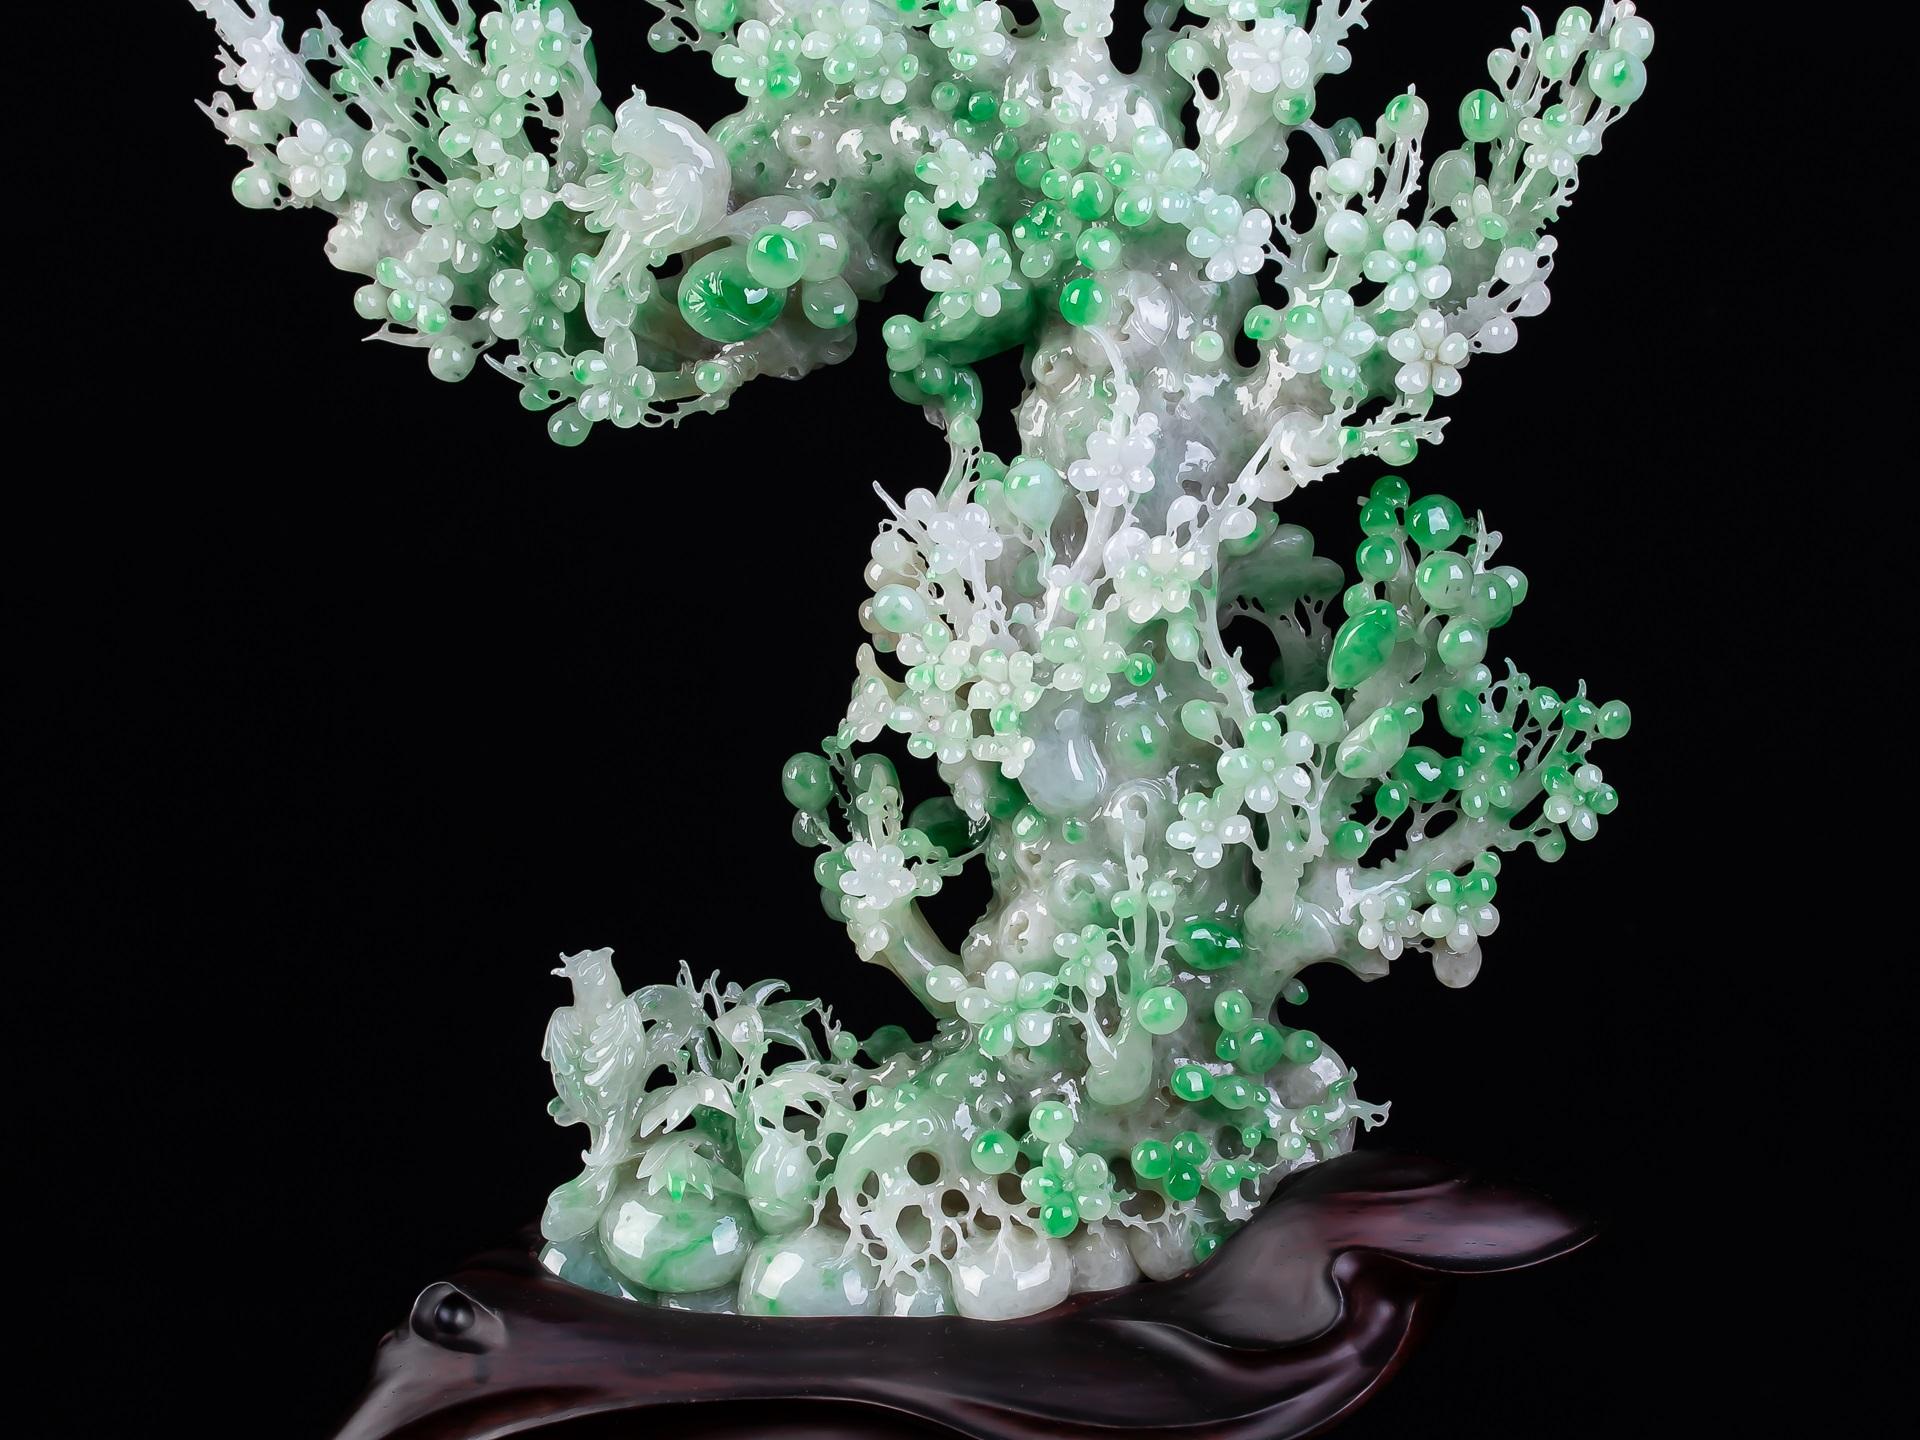 Jadeite Jade Bonsai Tree with Birds Carving - Other Art Style Sculpture by Unknown